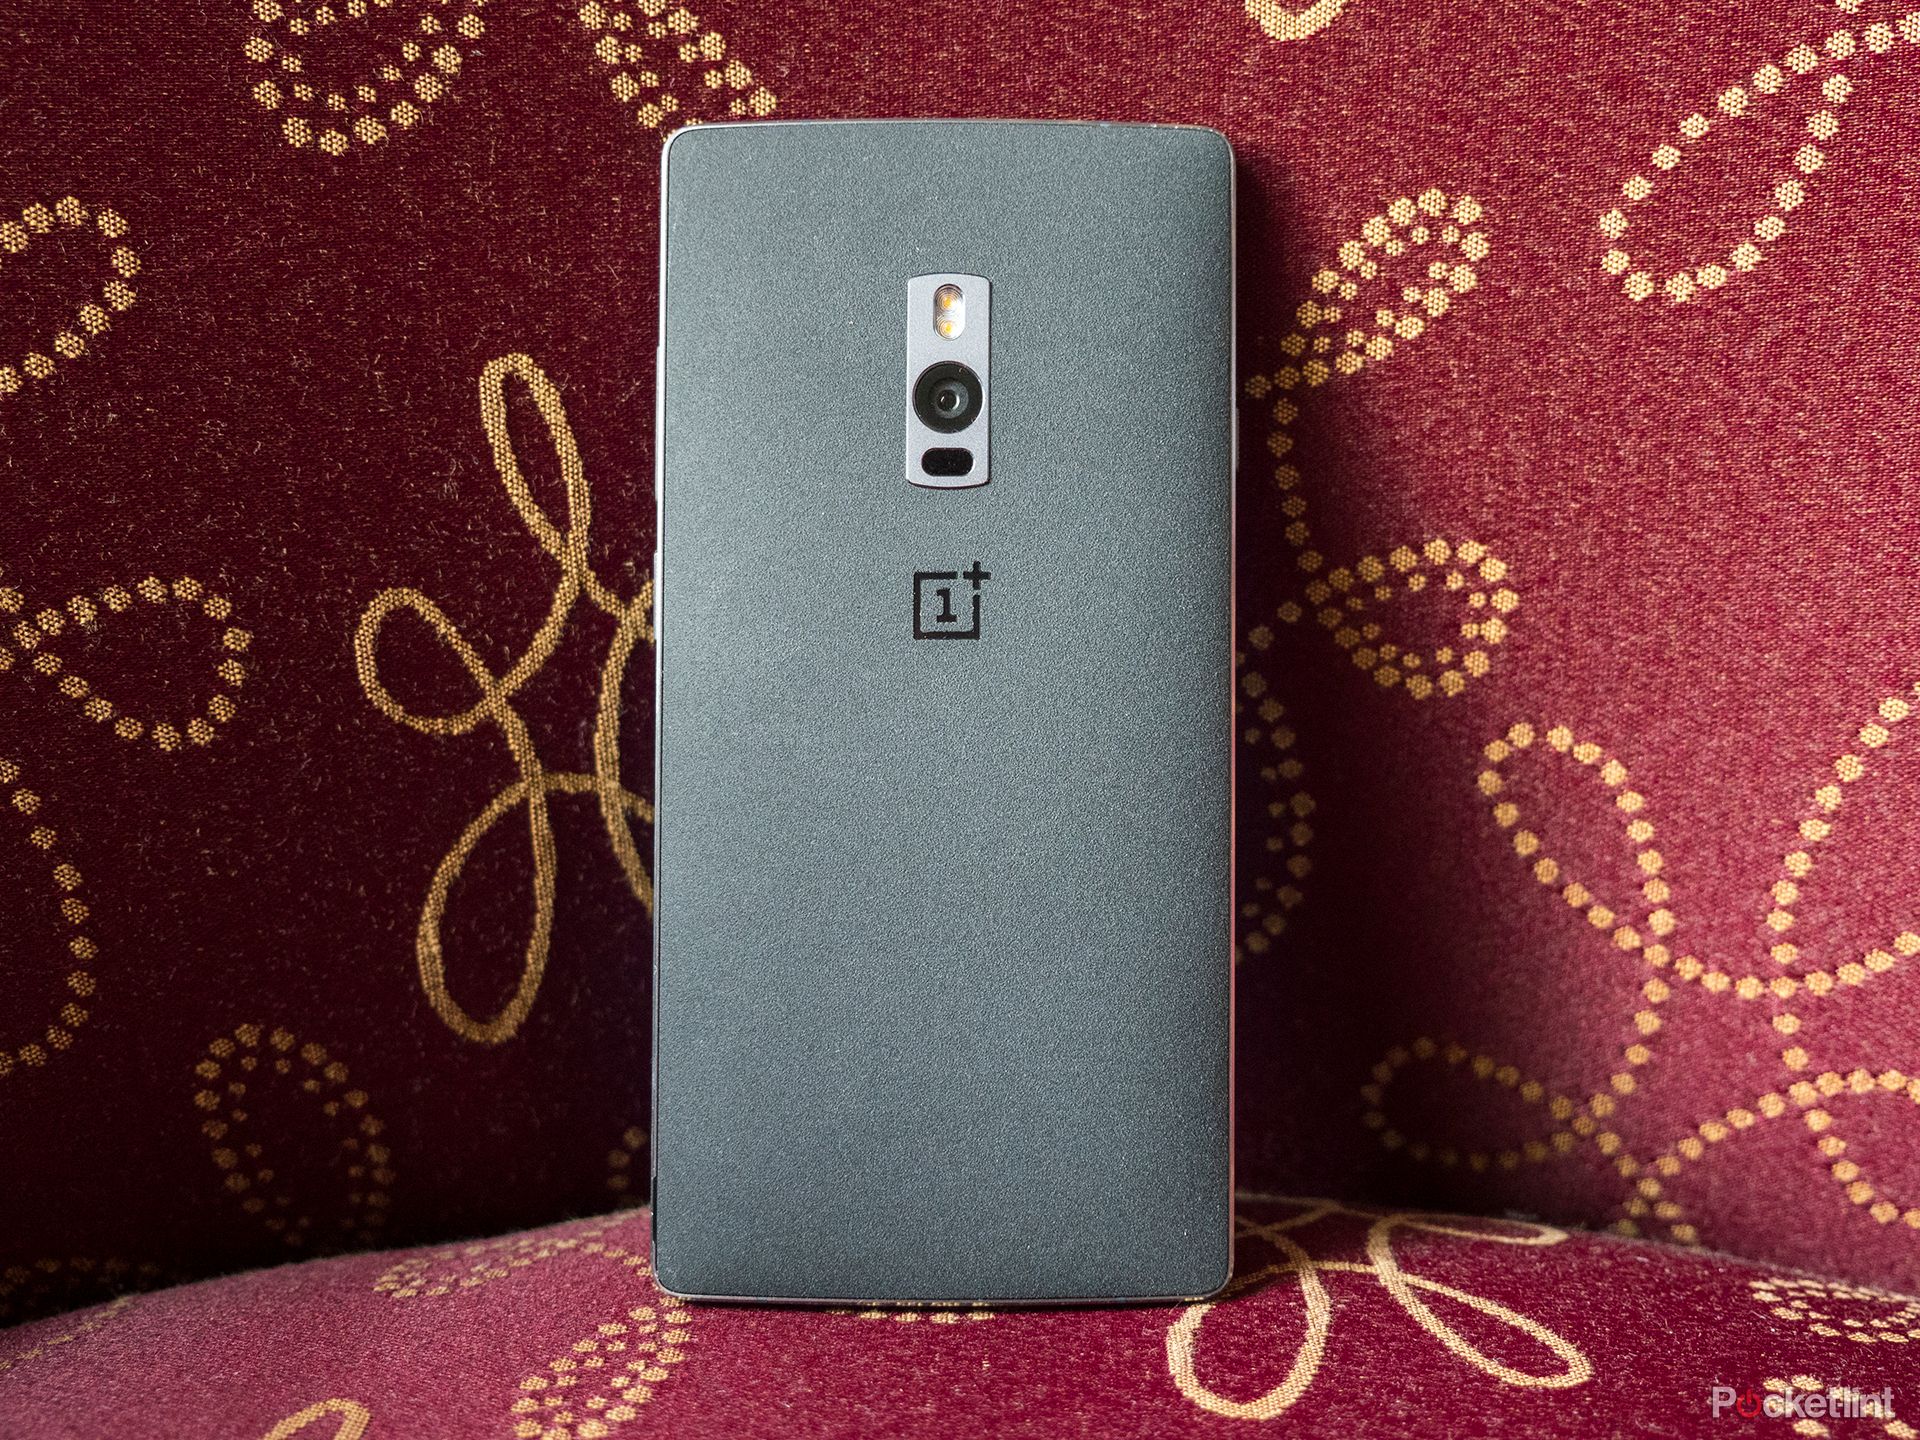 oneplus 2 now available to everyone no more invites needed image 1